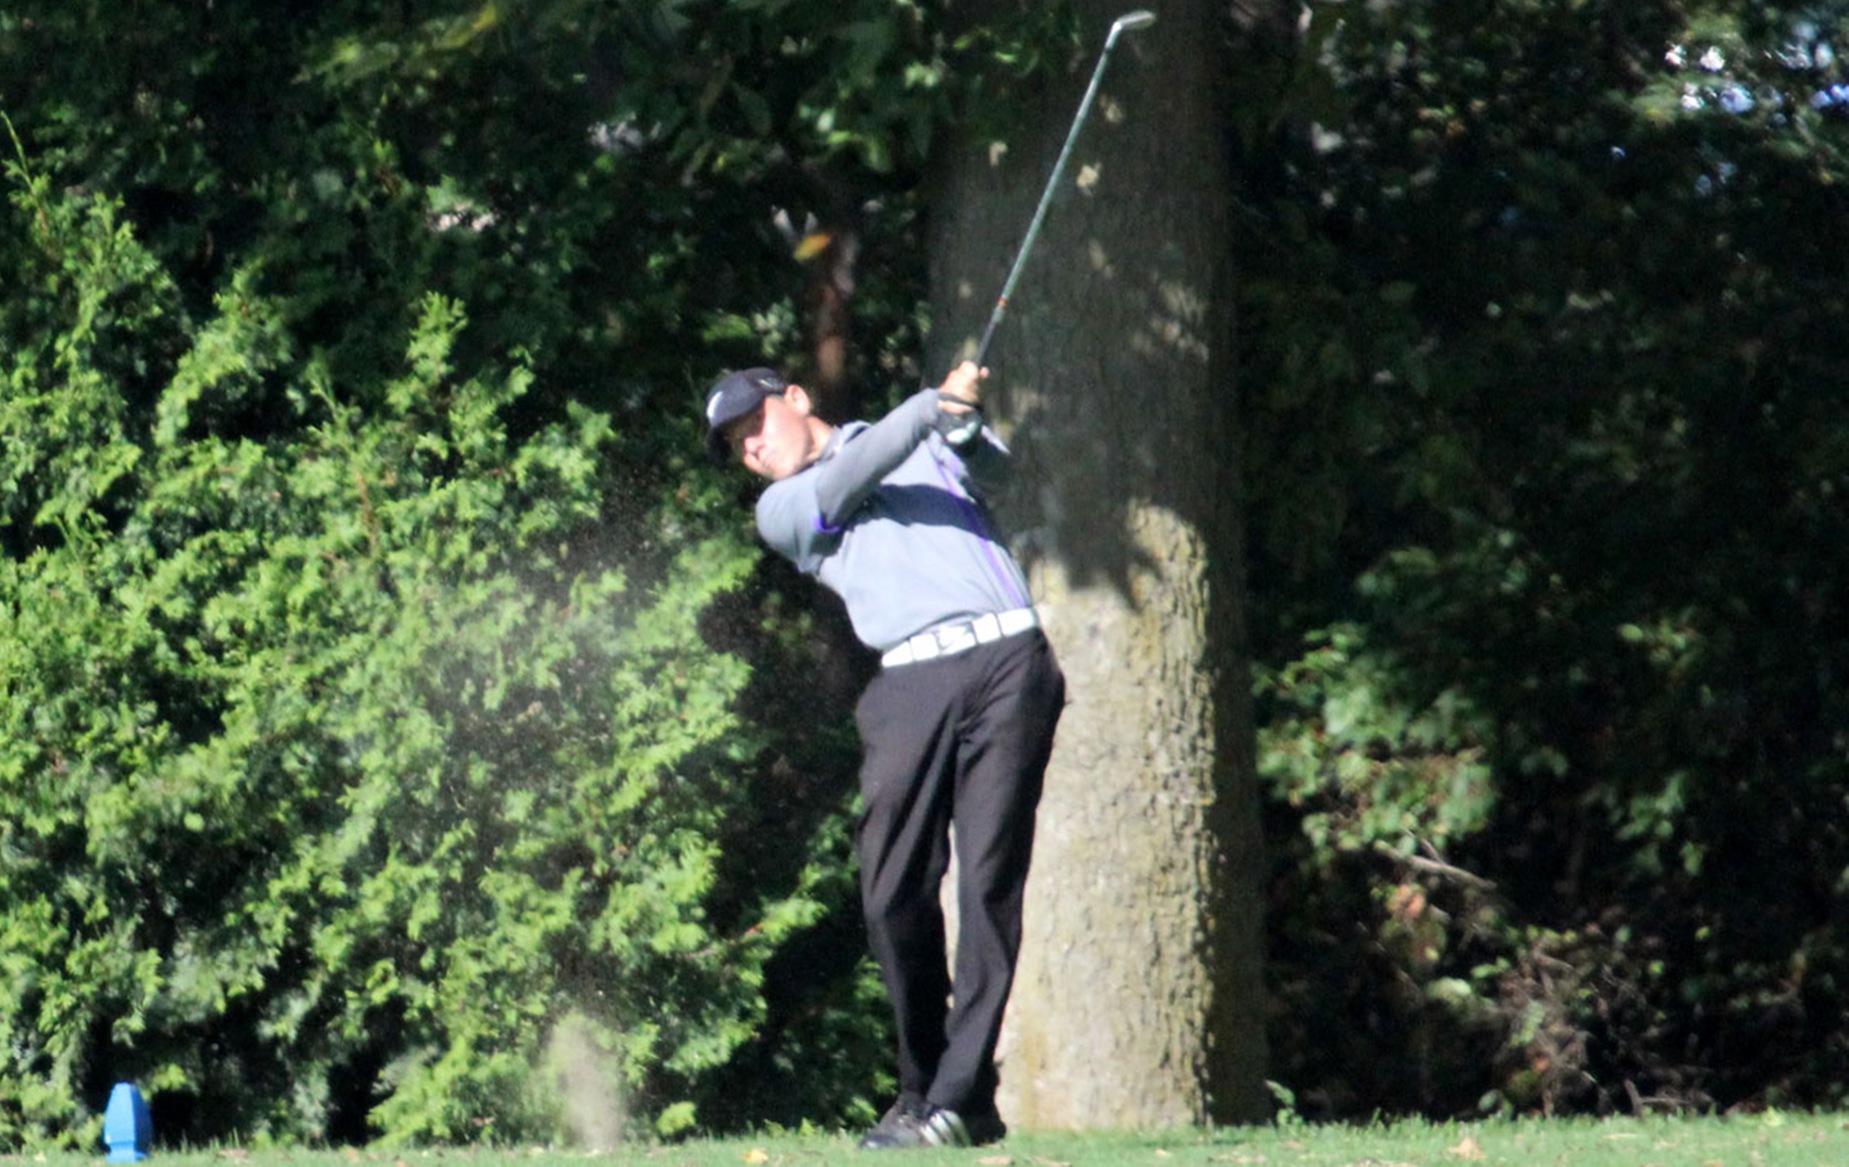 Jackets finish 10th at Mount St. Joseph to open spring